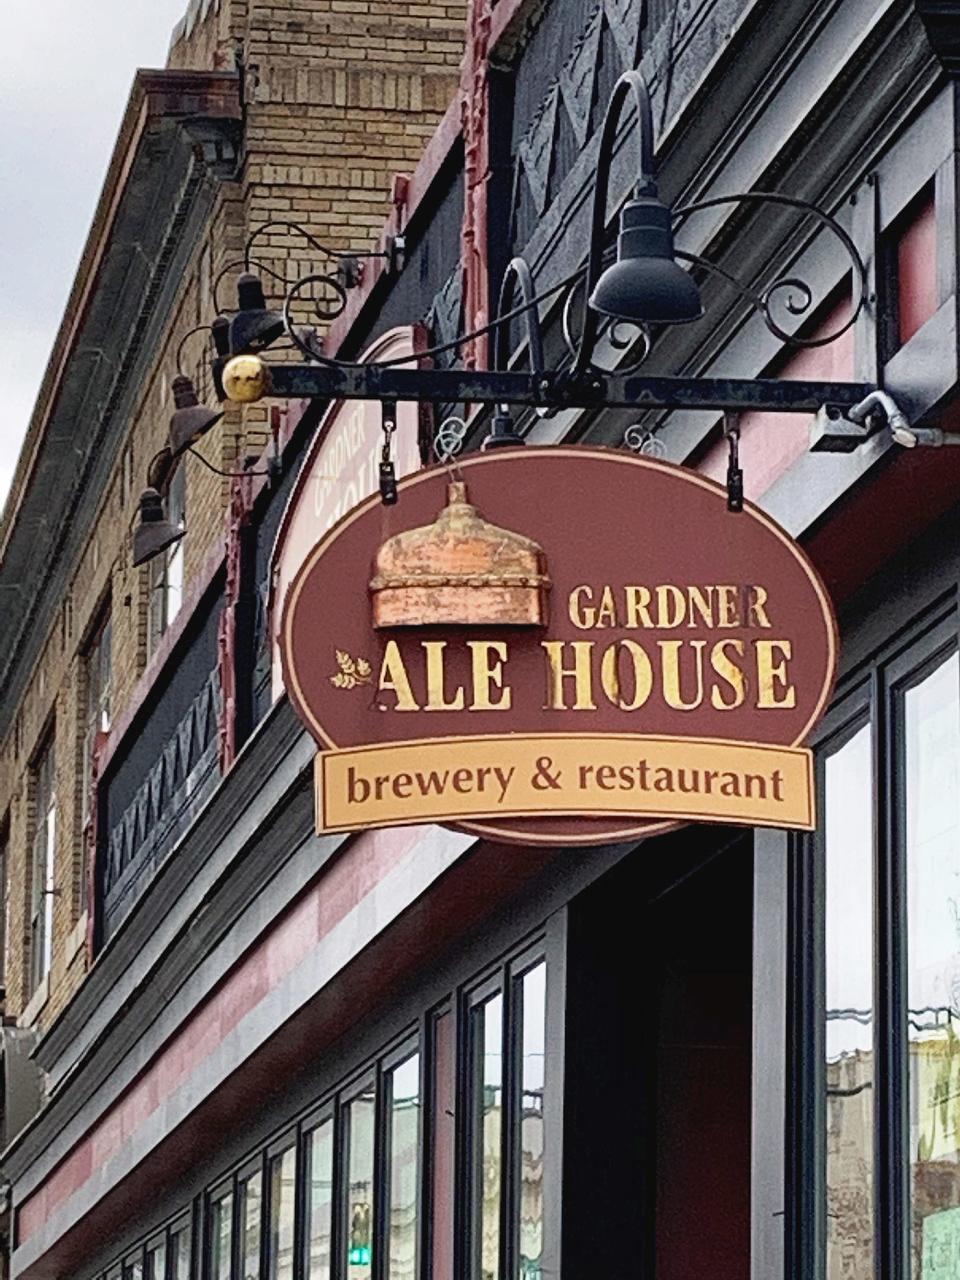 The Gardner Ale House is located at 74 Parker St. in Gardner.